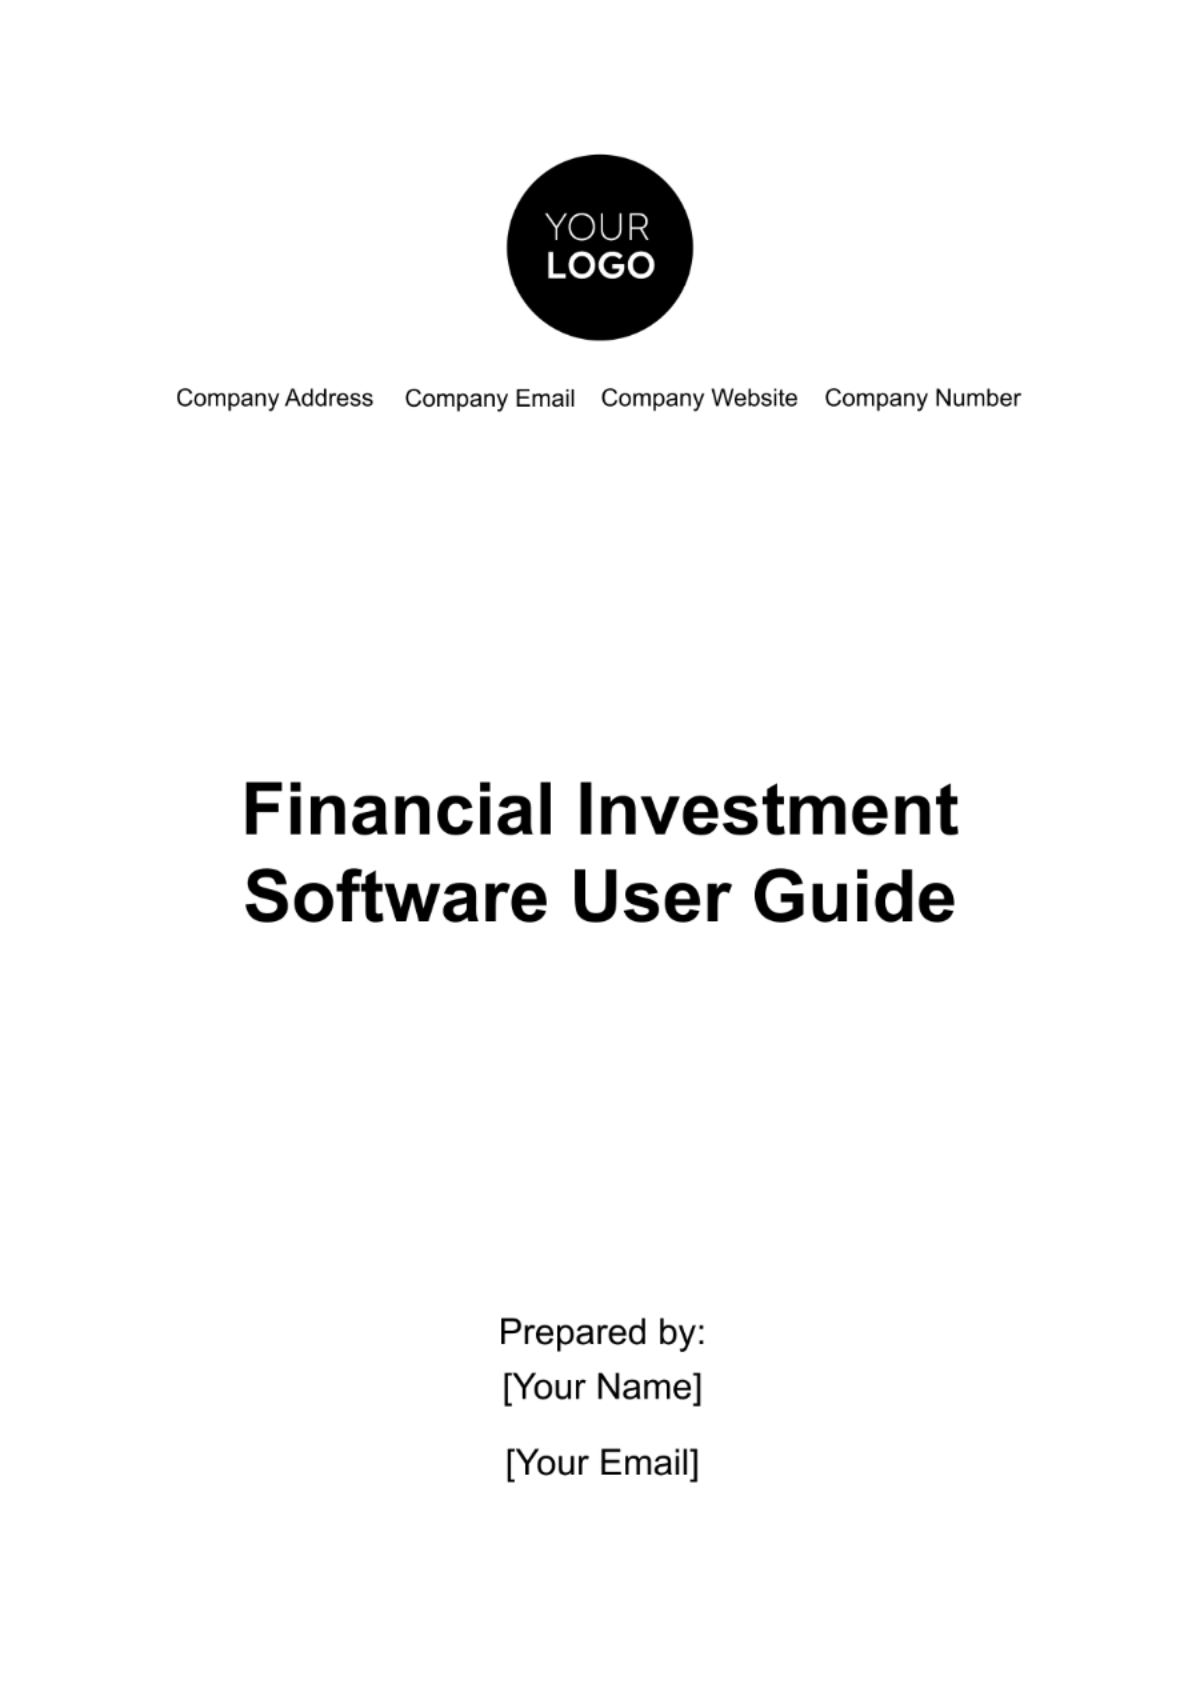 Financial Investment Software User Guide Template